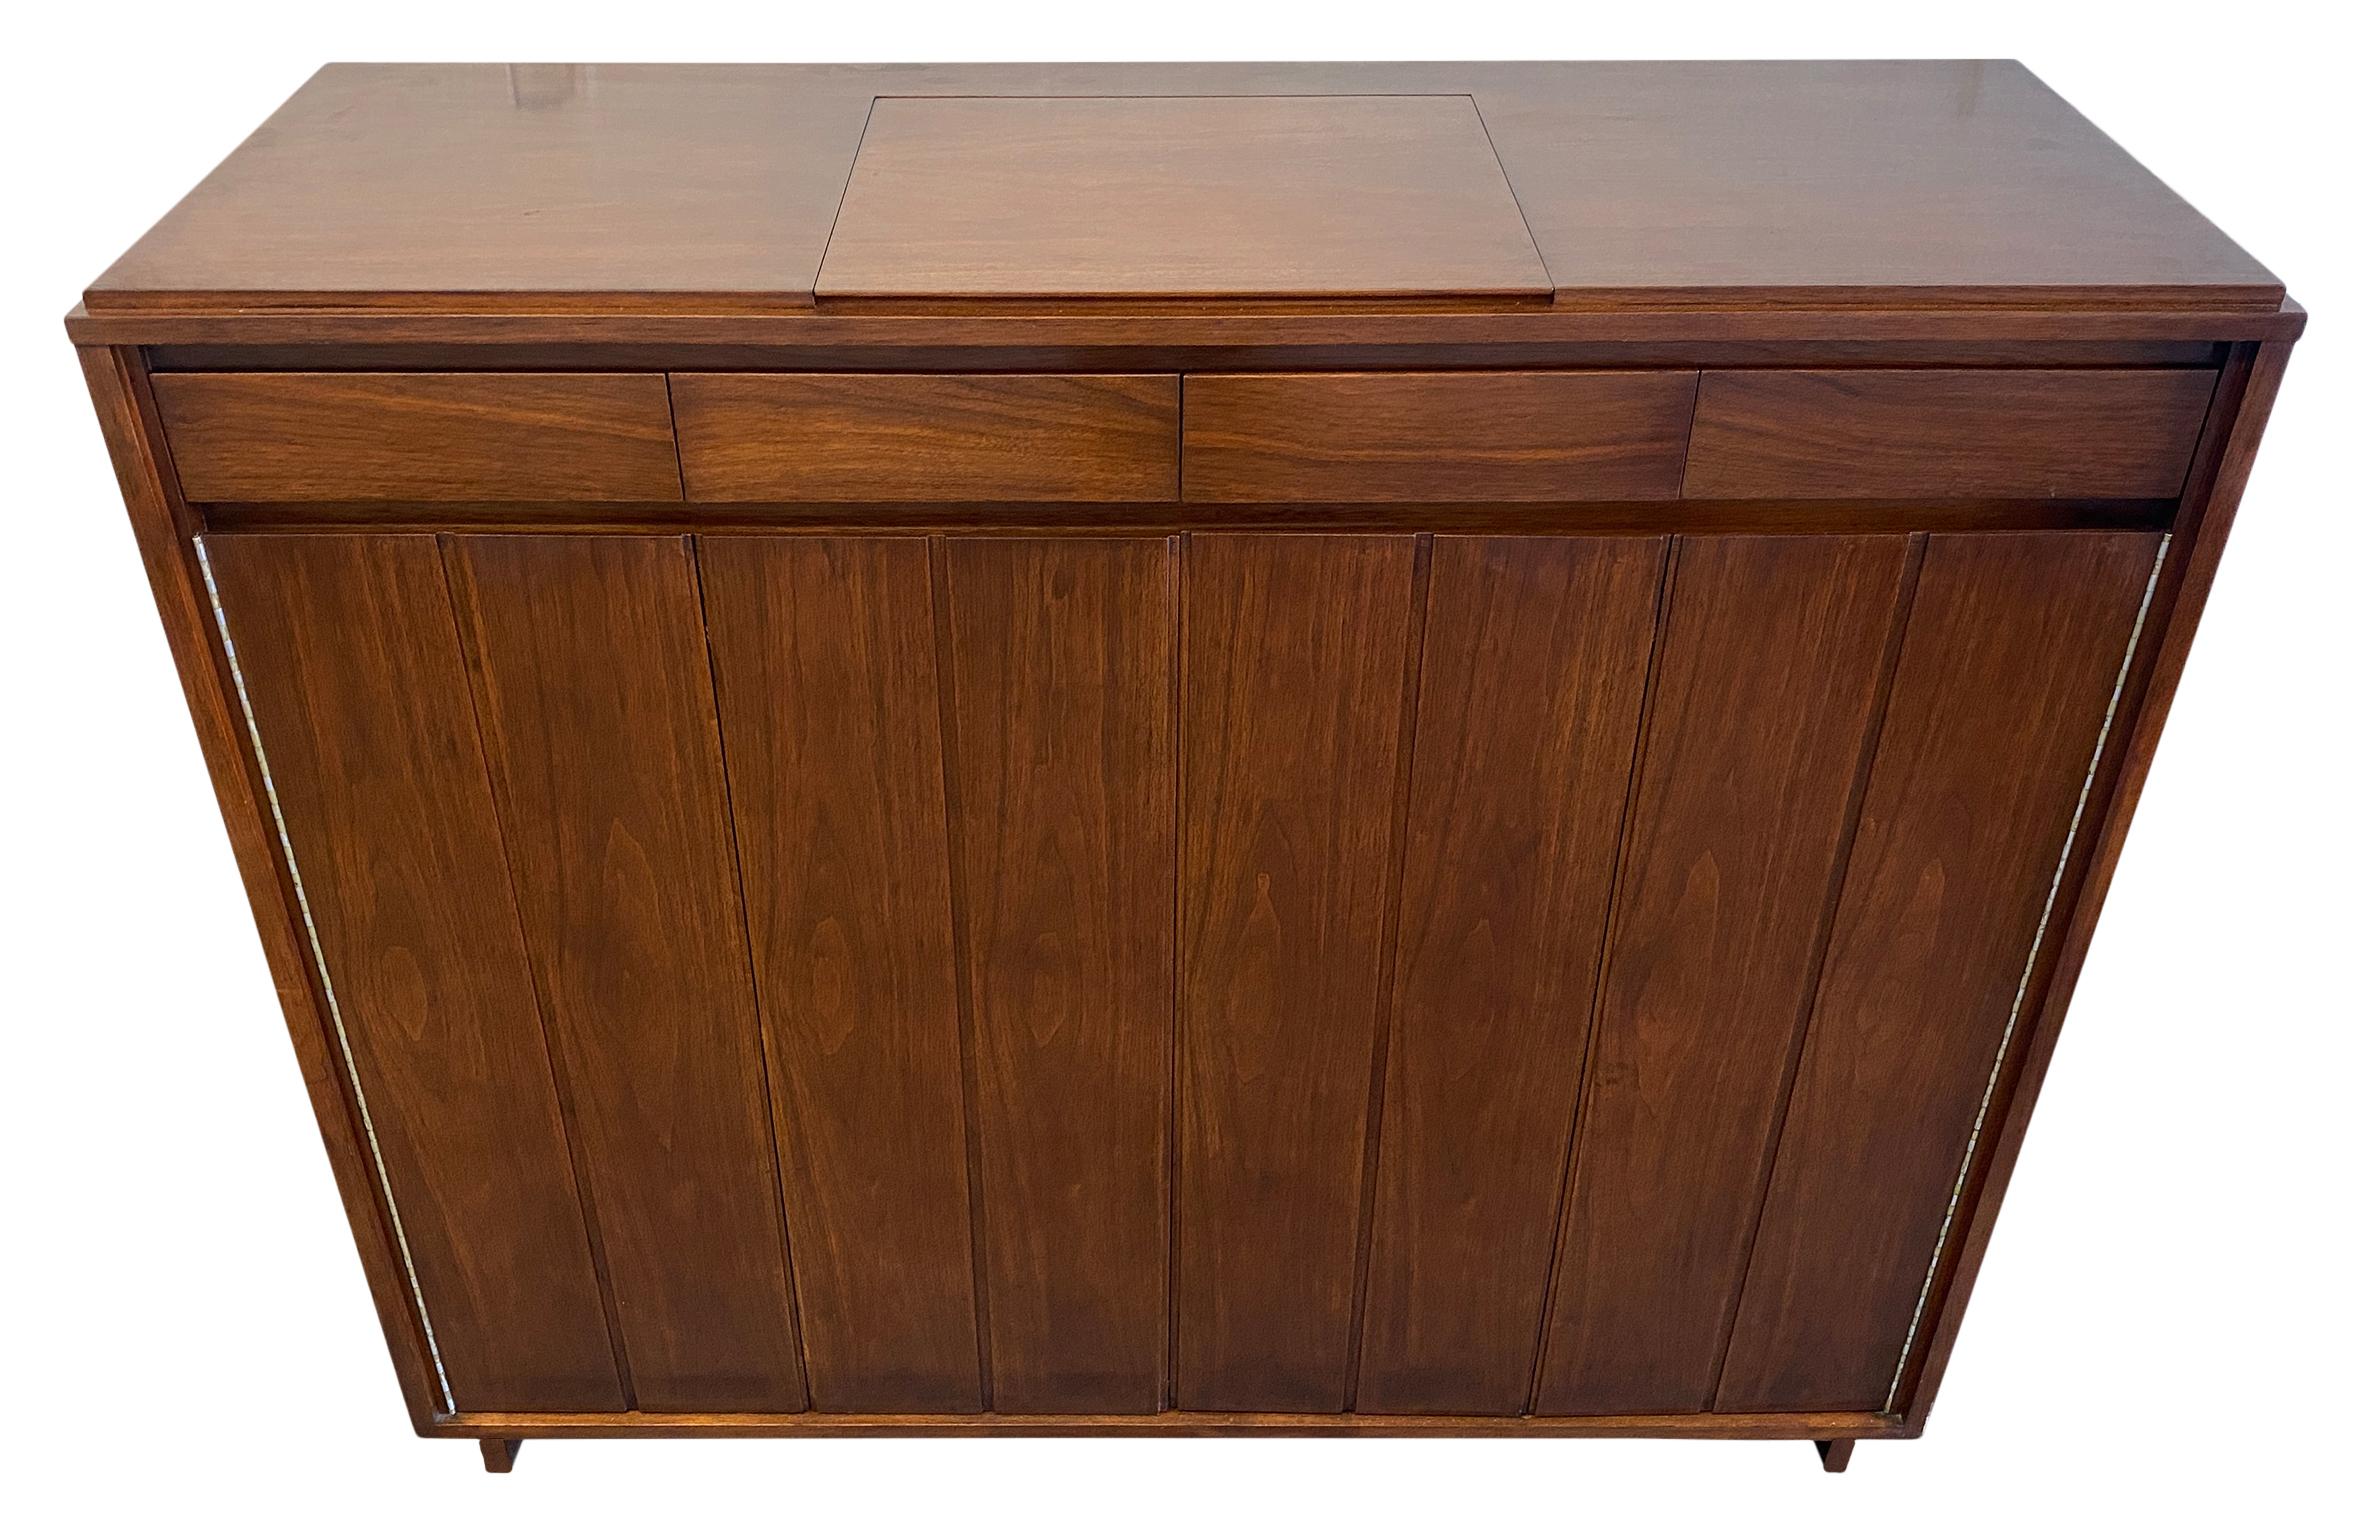 Rare midcentury American designer Paul McCobb Walnut 9-drawer dresser wardrobe #8074. Original finish in beautiful Vintage condition, has original folding walnut front accordion doors with magnets in amazing condition, all solid walnut with a dark